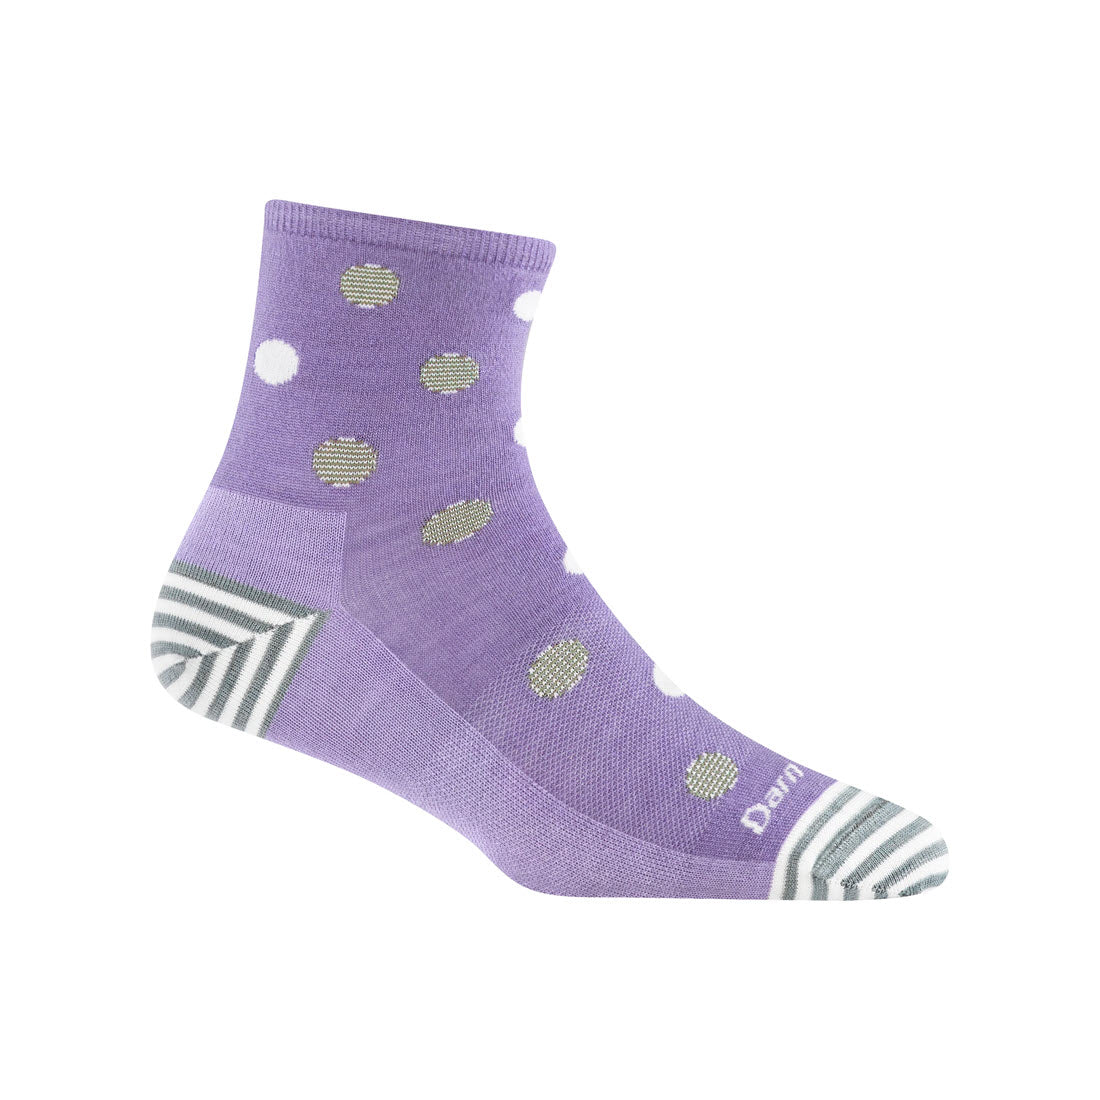 A single Lavender Darn Tough Dottie Shorty sock adorned with white polka dots and striped heel and toe sections, displayed against a white background. This Darn Tough sock offers classic character in its design.